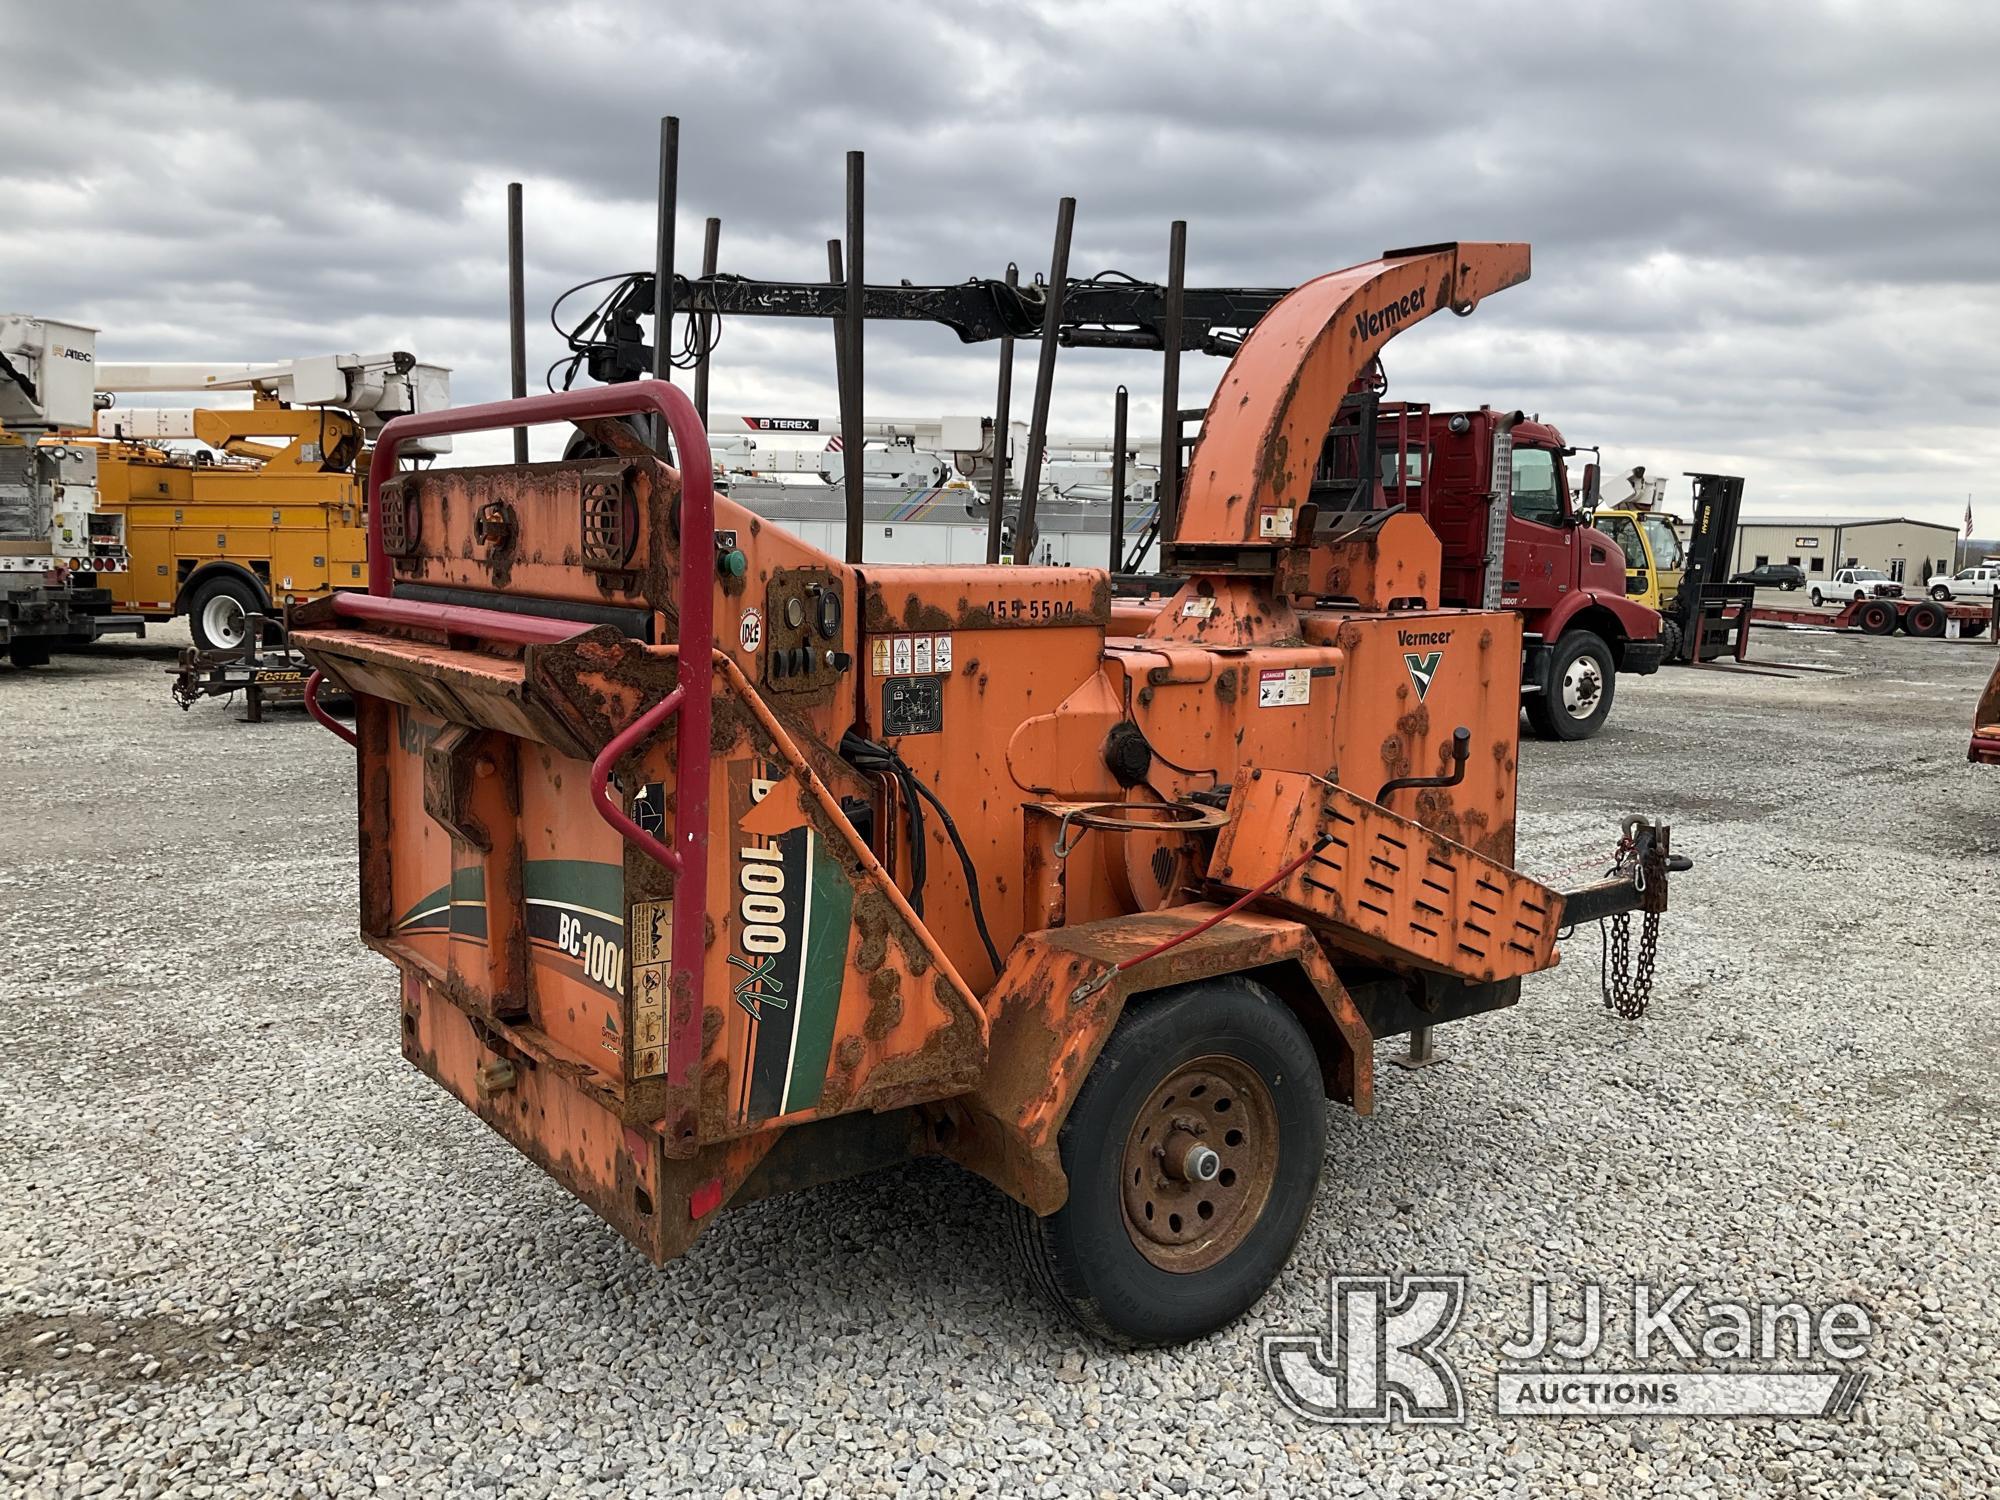 (Shrewsbury, MA) 2015 Vermeer BC1000XL Chipper (12in Drum) Runs) (Operating Condition Unknown, Rust